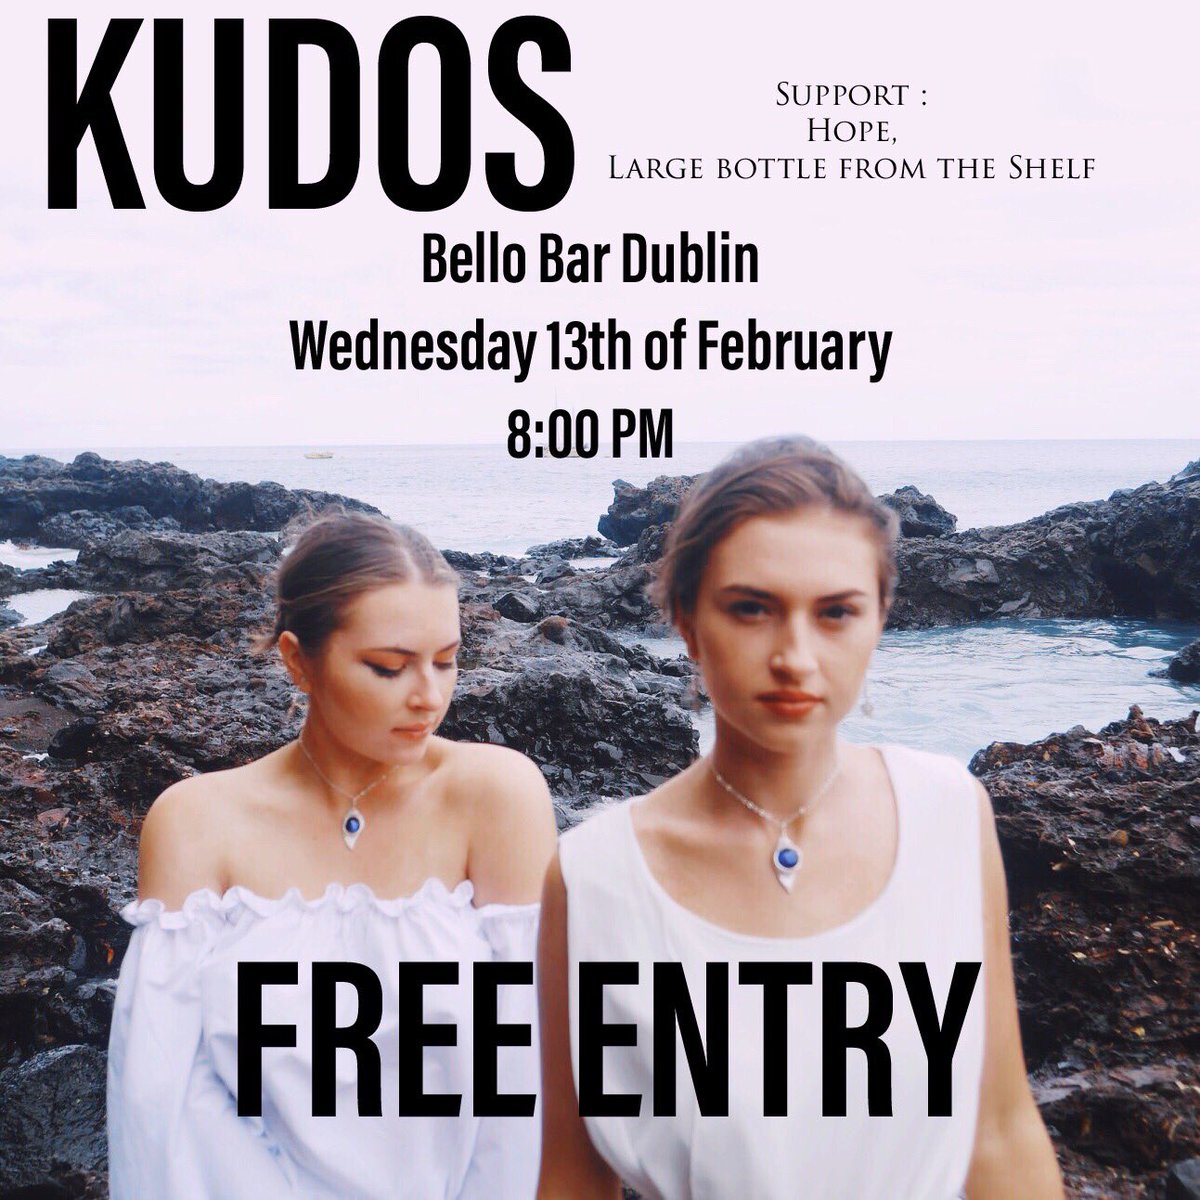 Only two weeks away!! Can’t wait to see you all there! 💕❤️@LovinDublin @BelloBarDublin @NewMusicDublin @DublinLive @DublinMuScene